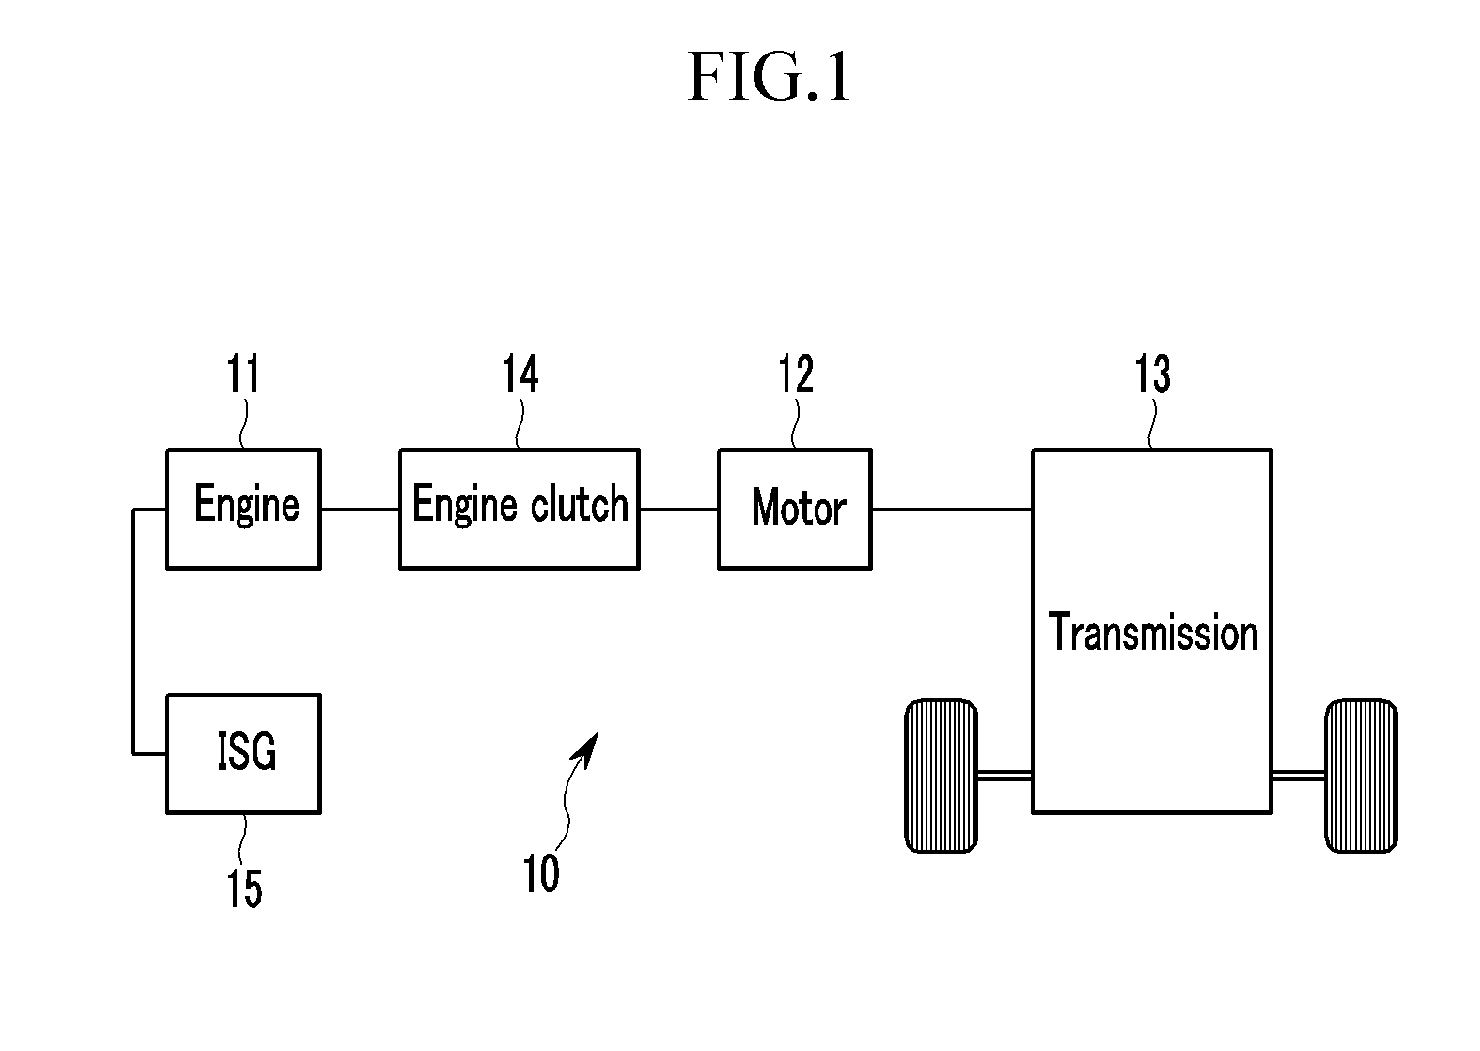 Method and system for learning and controlling torque transmission kiss point of engine clutch for hybrid electric vehicle